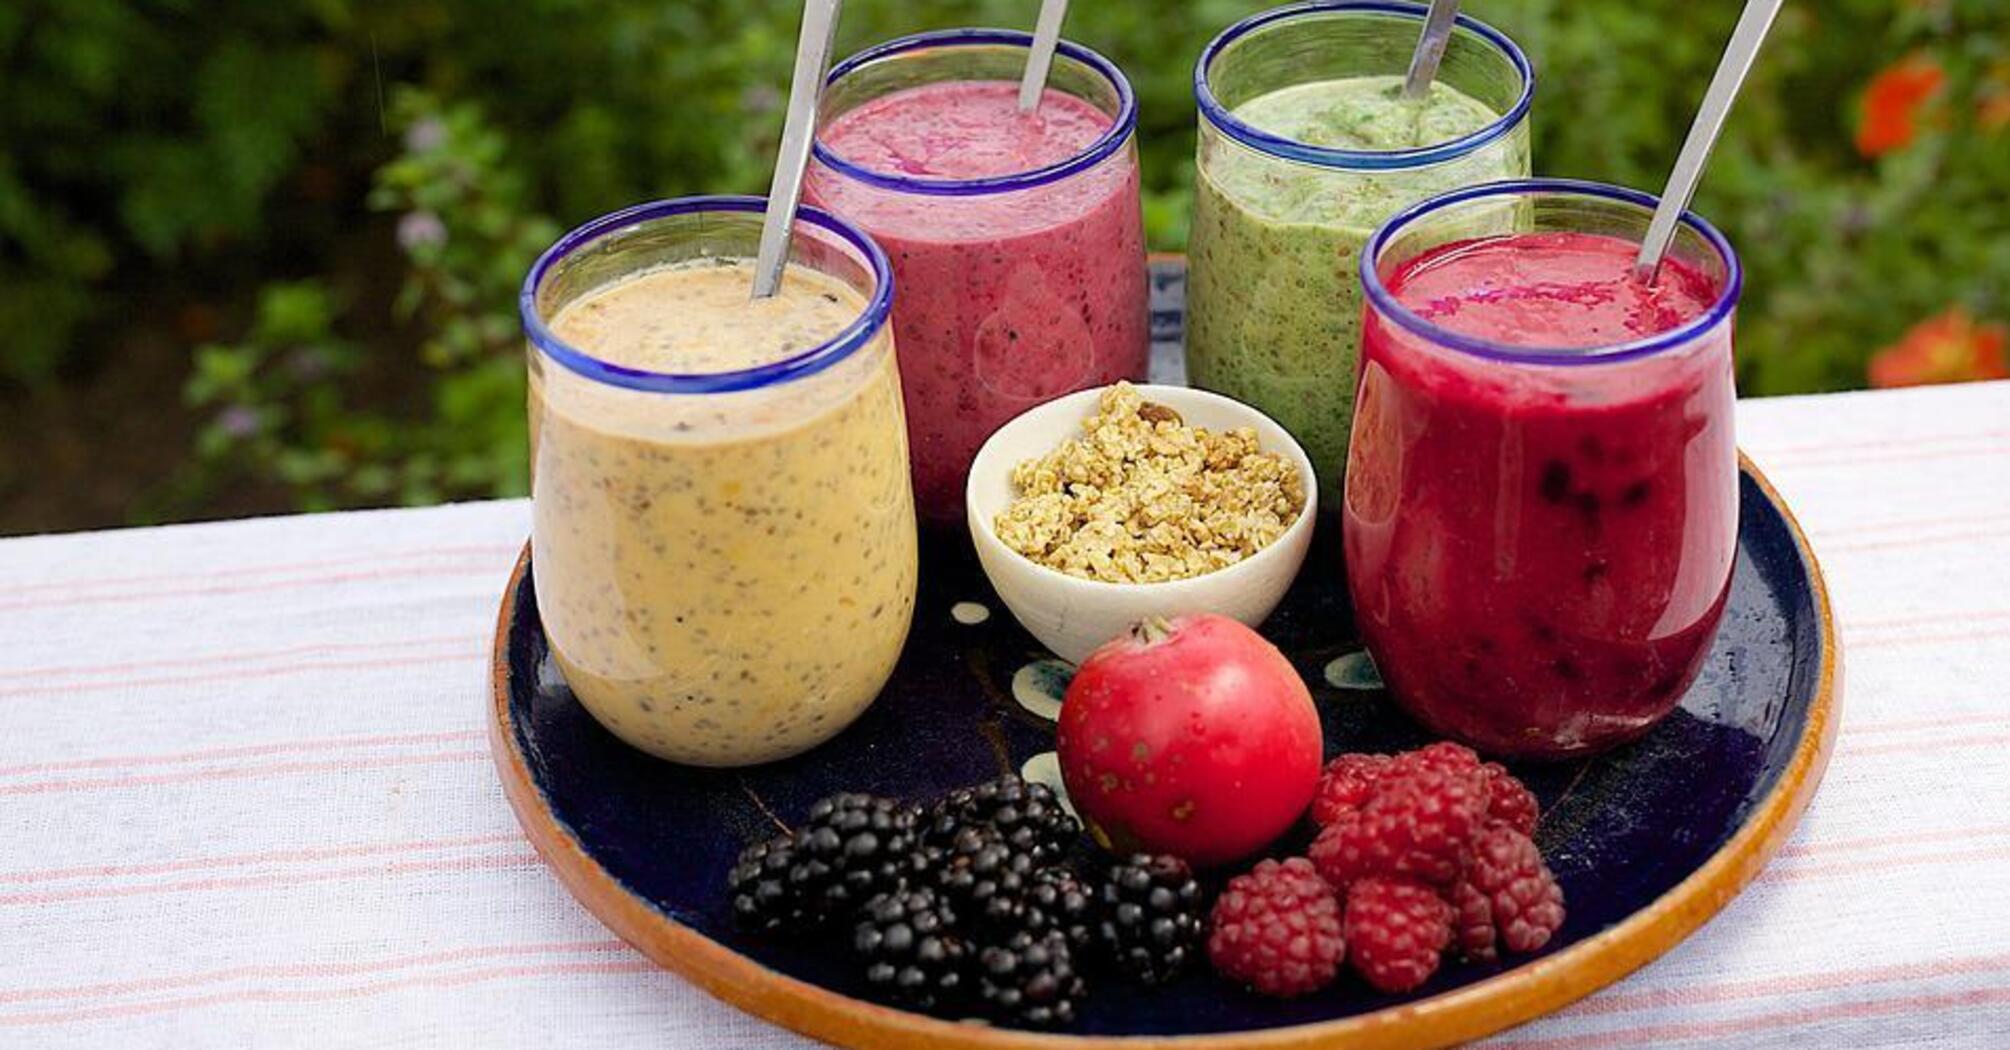 What to make a smoothie from to make it healthy: a vitamin drink idea